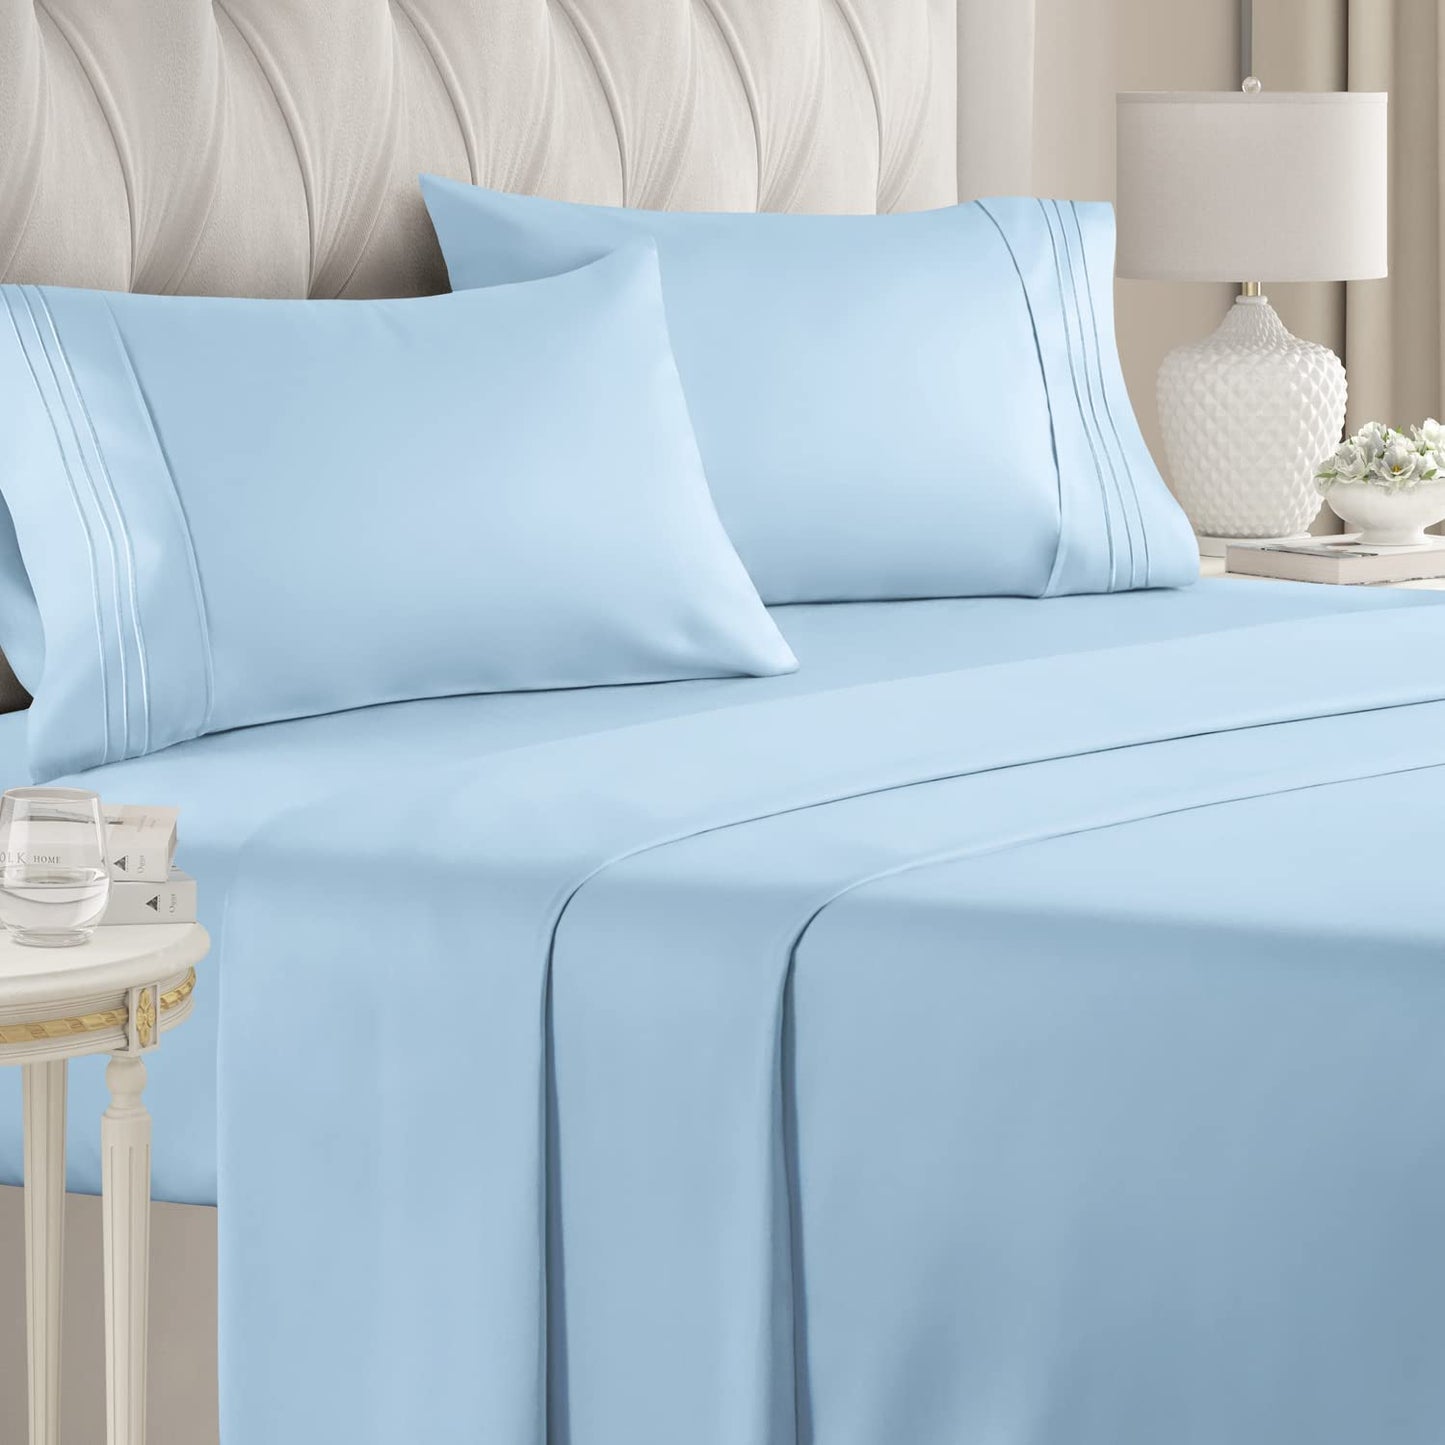 Buy King Size Flat Sheet Blue Egyptian Cotton 1000 Thread Count at- Egyptianhomelinens.com